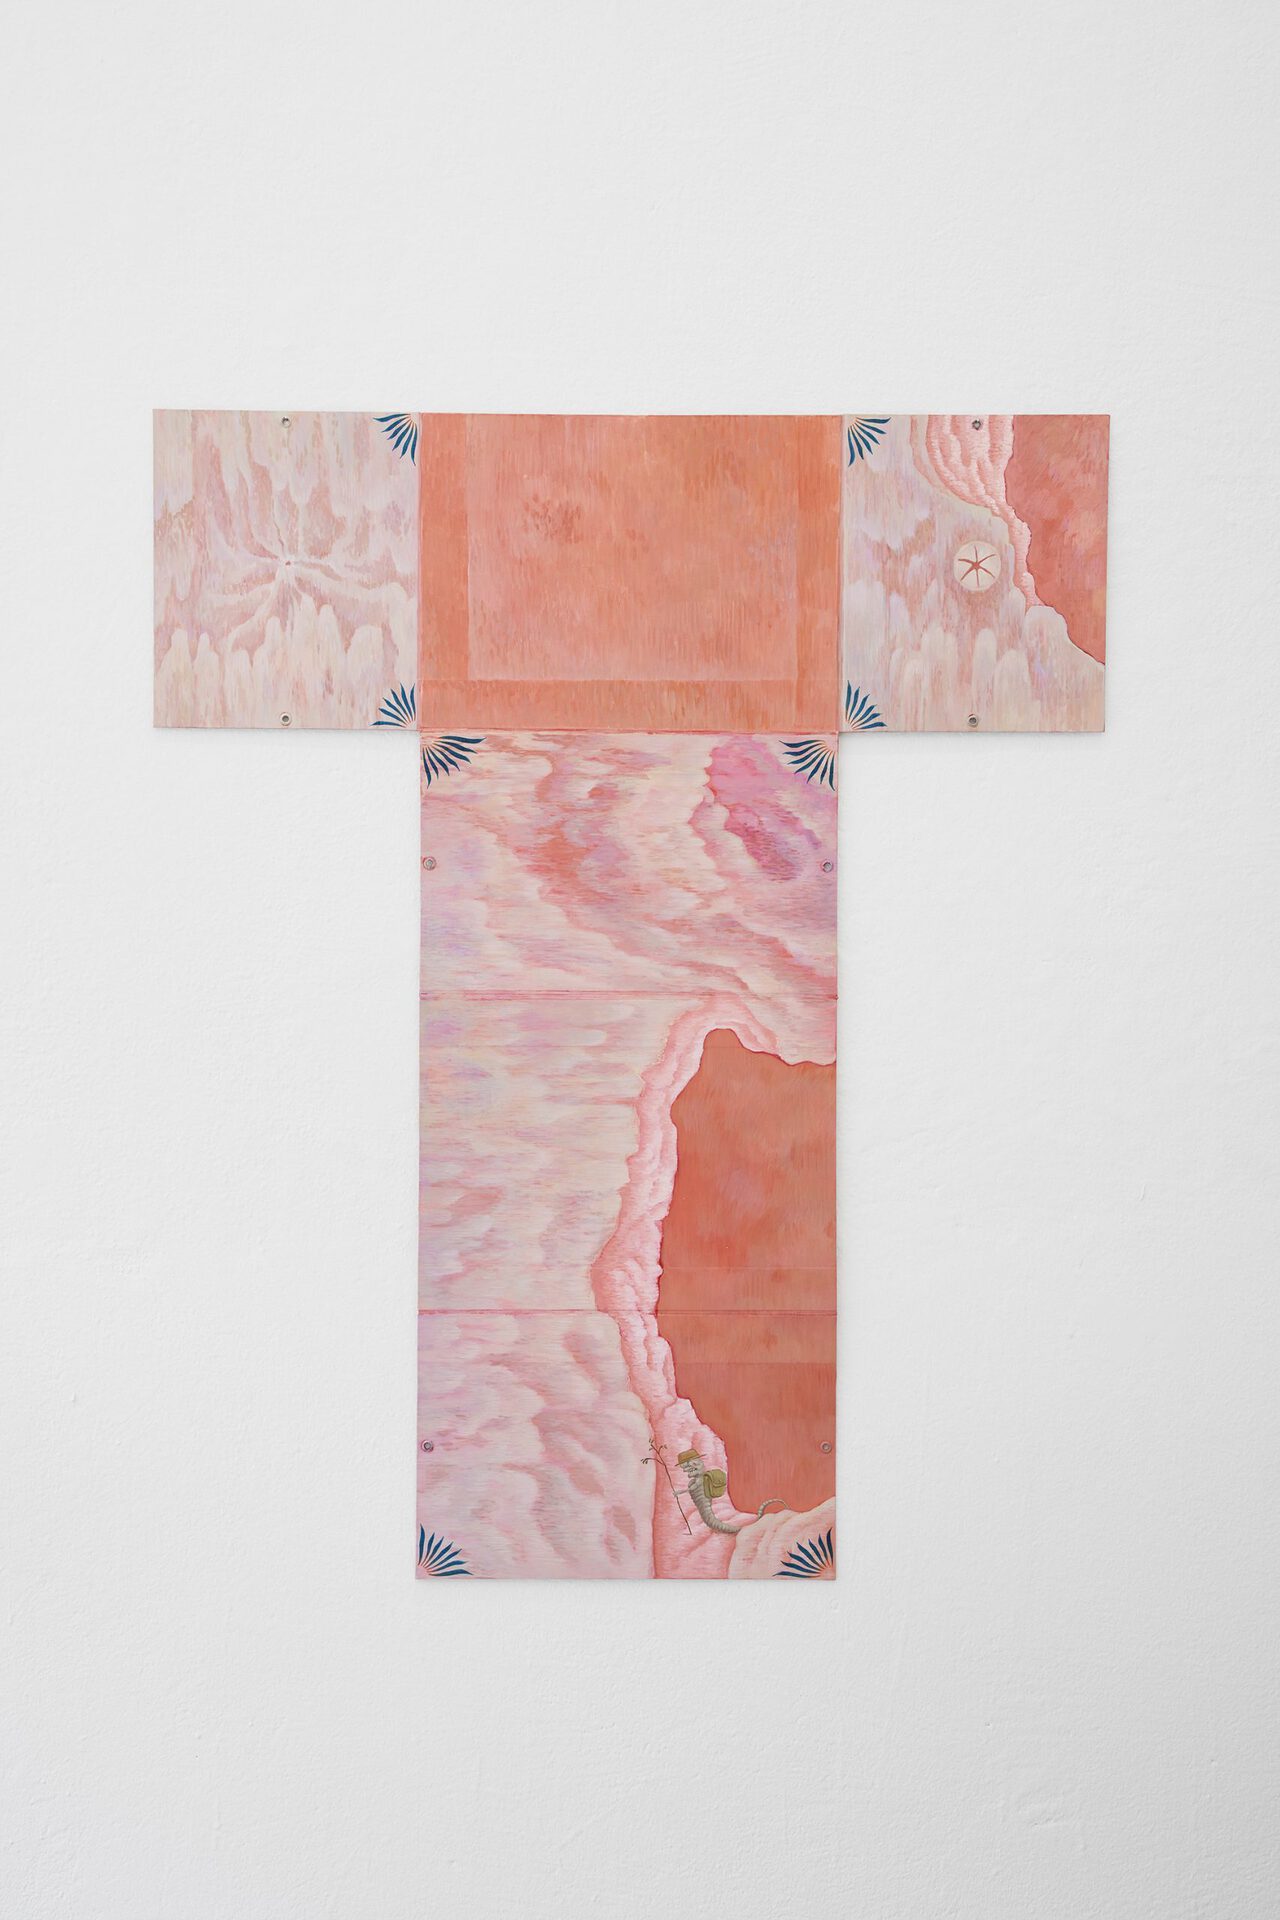 Yong Xiang Li, Chestburster go hiking in a pomegranate landscape, 2021, Acrylic on cotton on cardboard, eyelet, synthetic ribbon, 25 x 30 x 40 cm, unfolded: 110 x 90 cm